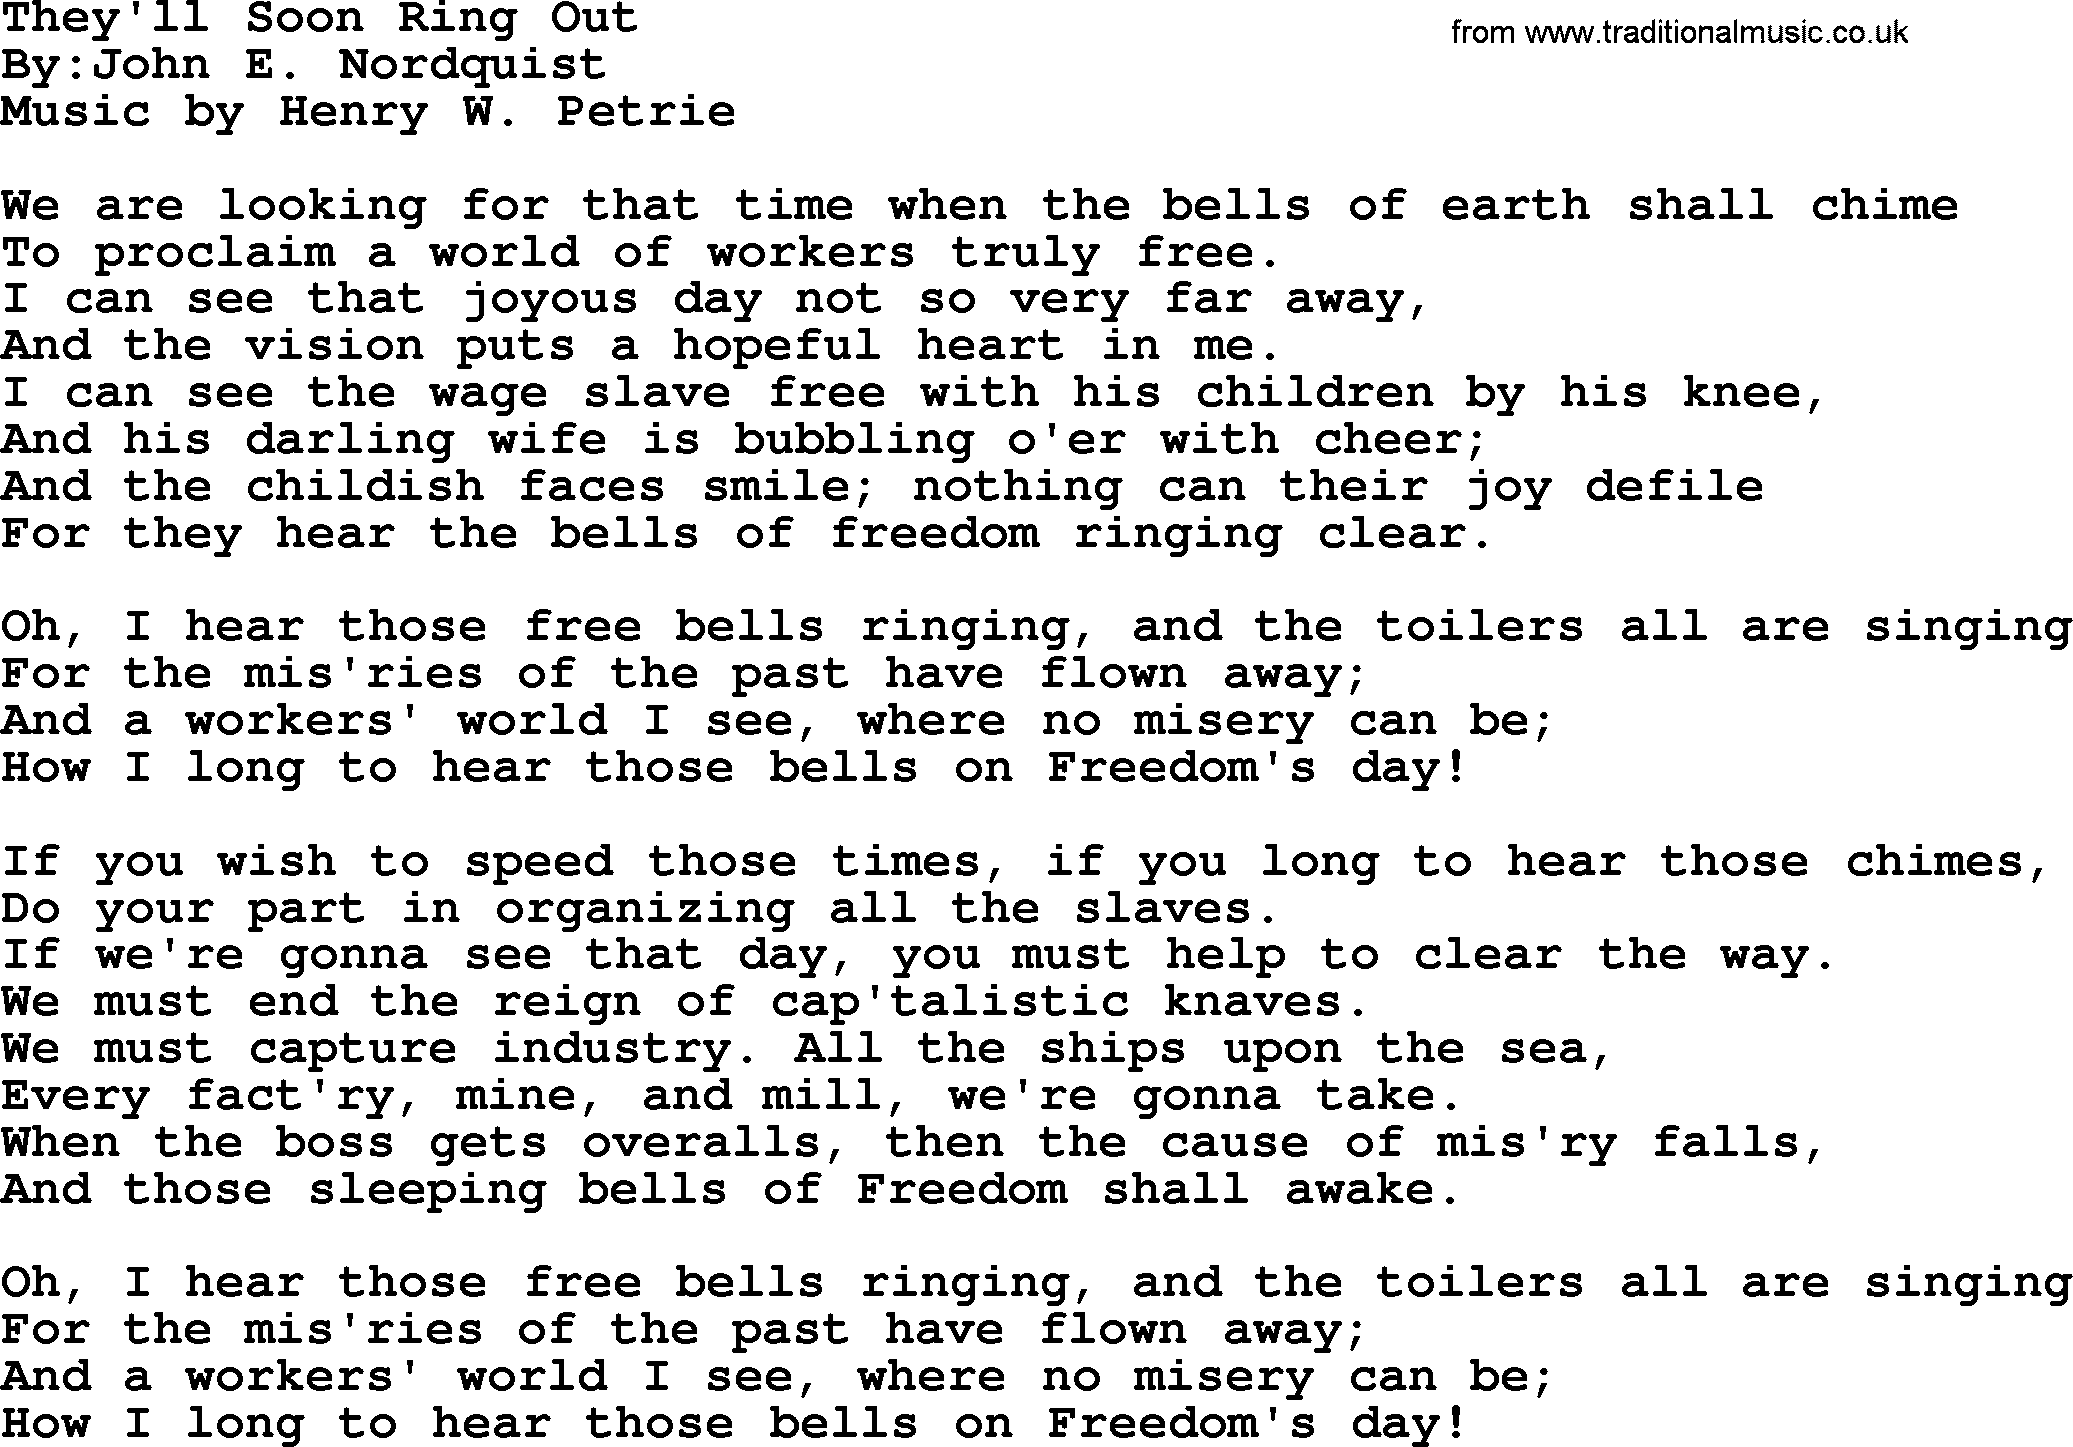 Political, Solidarity, Workers or Union song: Theyll Soon Ring Out, lyrics